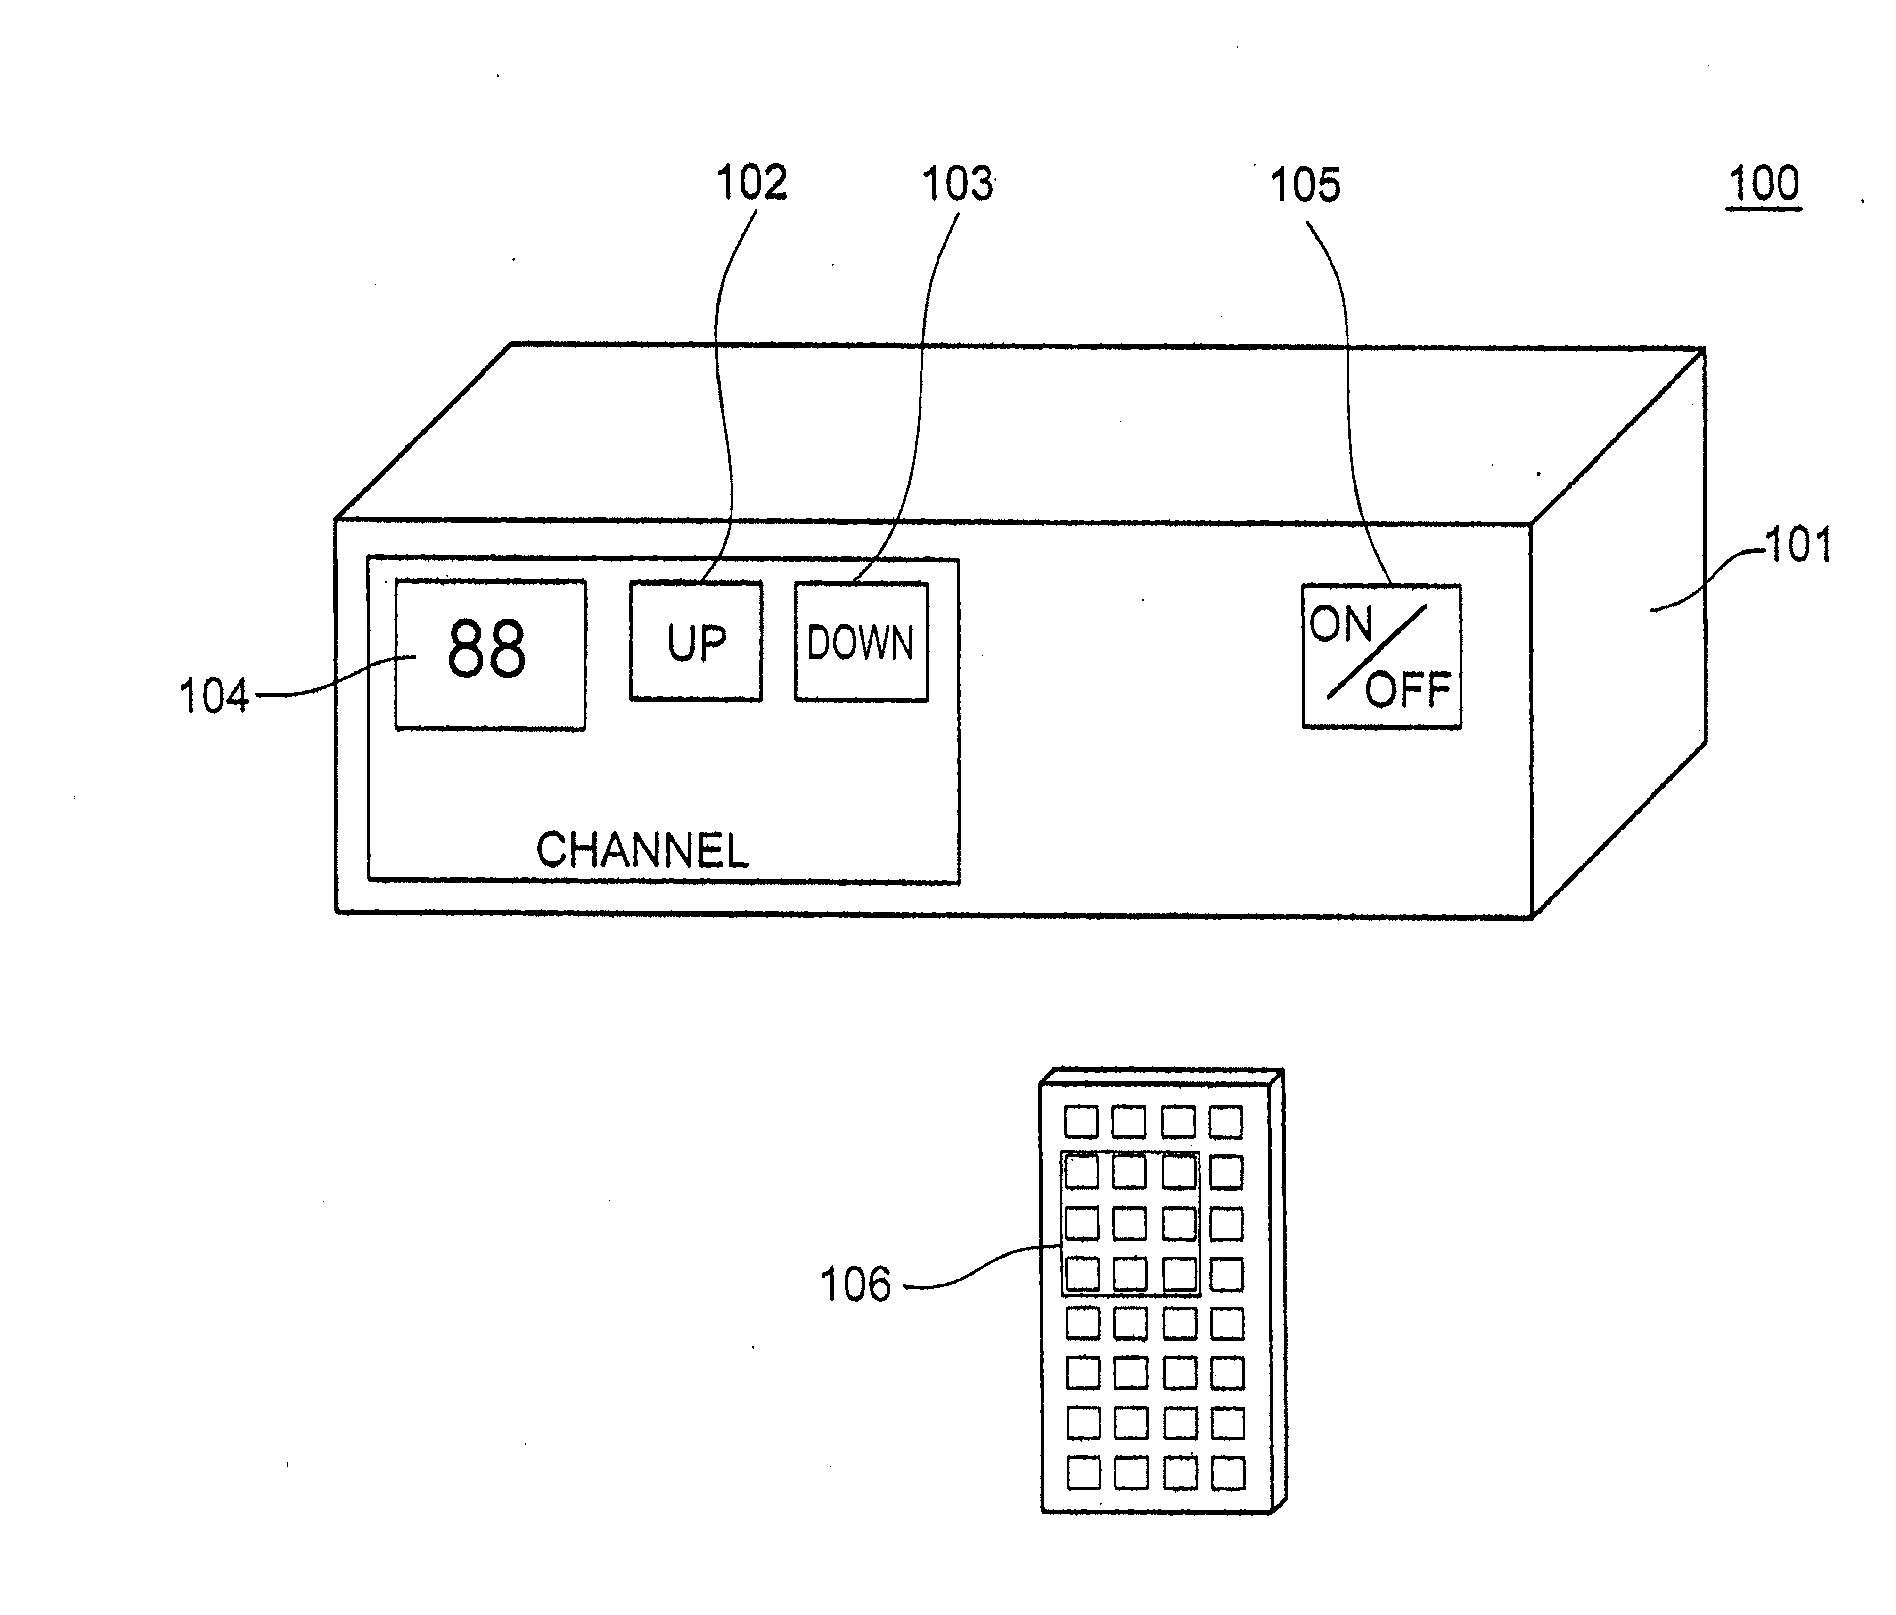 Method and apparatus for internet protocol television media content sharing